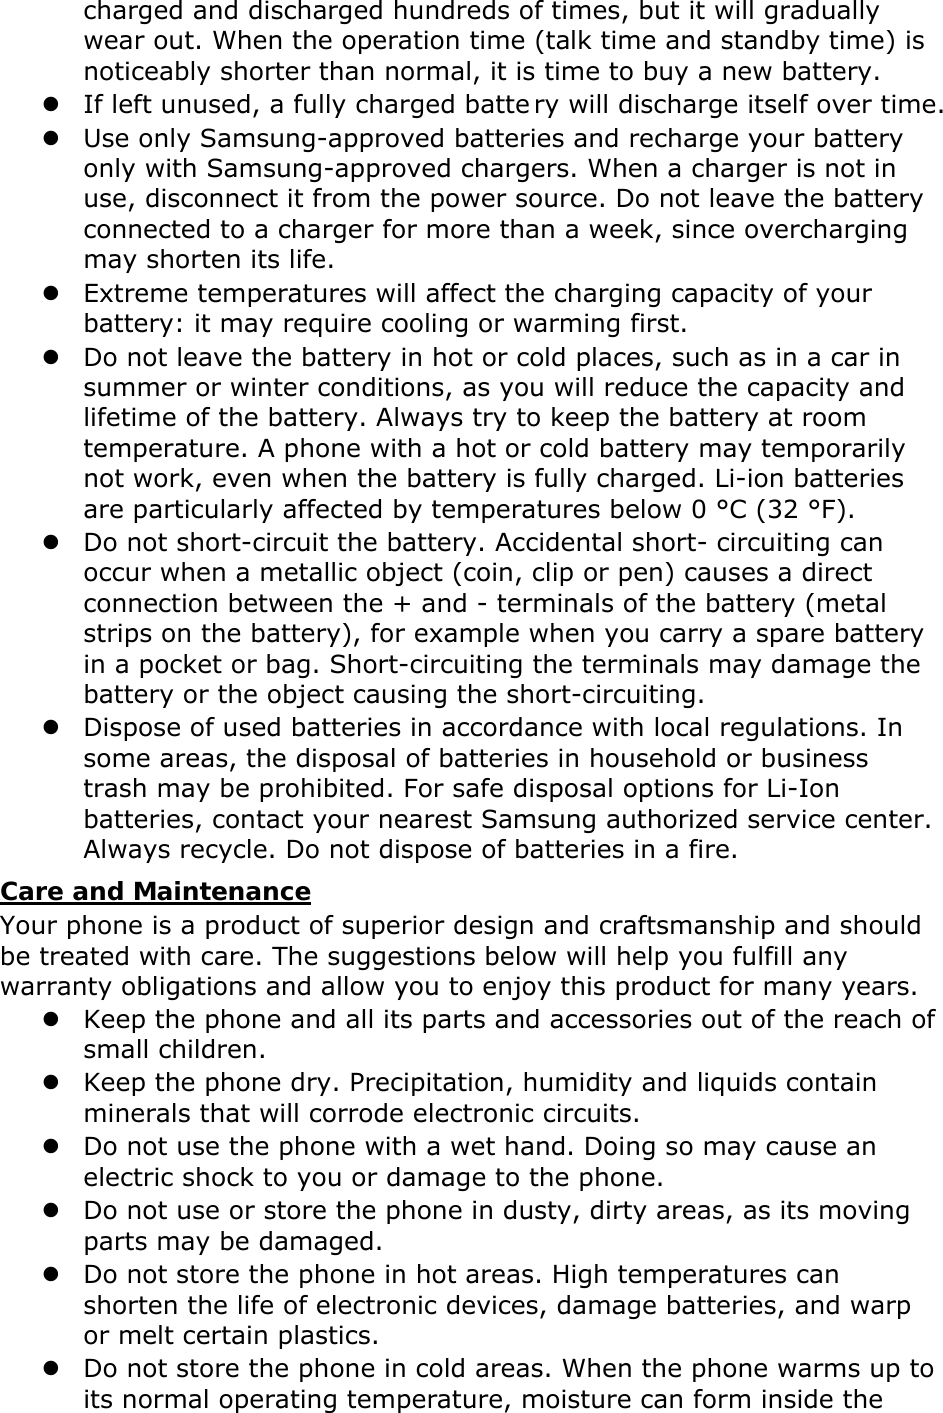 charged and discharged hundreds of times, but it will gradually wear out. When the operation time (talk time and standby time) is noticeably shorter than normal, it is time to buy a new battery. z If left unused, a fully charged batte ry will discharge itself over time.  z Use only Samsung-approved batteries and recharge your battery only with Samsung-approved chargers. When a charger is not in use, disconnect it from the power source. Do not leave the battery connected to a charger for more than a week, since overcharging may shorten its life. z Extreme temperatures will affect the charging capacity of your battery: it may require cooling or warming first. z Do not leave the battery in hot or cold places, such as in a car in summer or winter conditions, as you will reduce the capacity and lifetime of the battery. Always try to keep the battery at room temperature. A phone with a hot or cold battery may temporarily not work, even when the battery is fully charged. Li-ion batteries are particularly affected by temperatures below 0 °C (32 °F). z Do not short-circuit the battery. Accidental short- circuiting can occur when a metallic object (coin, clip or pen) causes a direct connection between the + and - terminals of the battery (metal strips on the battery), for example when you carry a spare battery in a pocket or bag. Short-circuiting the terminals may damage the battery or the object causing the short-circuiting. z Dispose of used batteries in accordance with local regulations. In some areas, the disposal of batteries in household or business trash may be prohibited. For safe disposal options for Li-Ion batteries, contact your nearest Samsung authorized service center. Always recycle. Do not dispose of batteries in a fire. Care and Maintenance Your phone is a product of superior design and craftsmanship and should be treated with care. The suggestions below will help you fulfill any warranty obligations and allow you to enjoy this product for many years. z Keep the phone and all its parts and accessories out of the reach of small children. z Keep the phone dry. Precipitation, humidity and liquids contain minerals that will corrode electronic circuits. z Do not use the phone with a wet hand. Doing so may cause an electric shock to you or damage to the phone. z Do not use or store the phone in dusty, dirty areas, as its moving parts may be damaged. z Do not store the phone in hot areas. High temperatures can shorten the life of electronic devices, damage batteries, and warp or melt certain plastics. z Do not store the phone in cold areas. When the phone warms up to its normal operating temperature, moisture can form inside the 